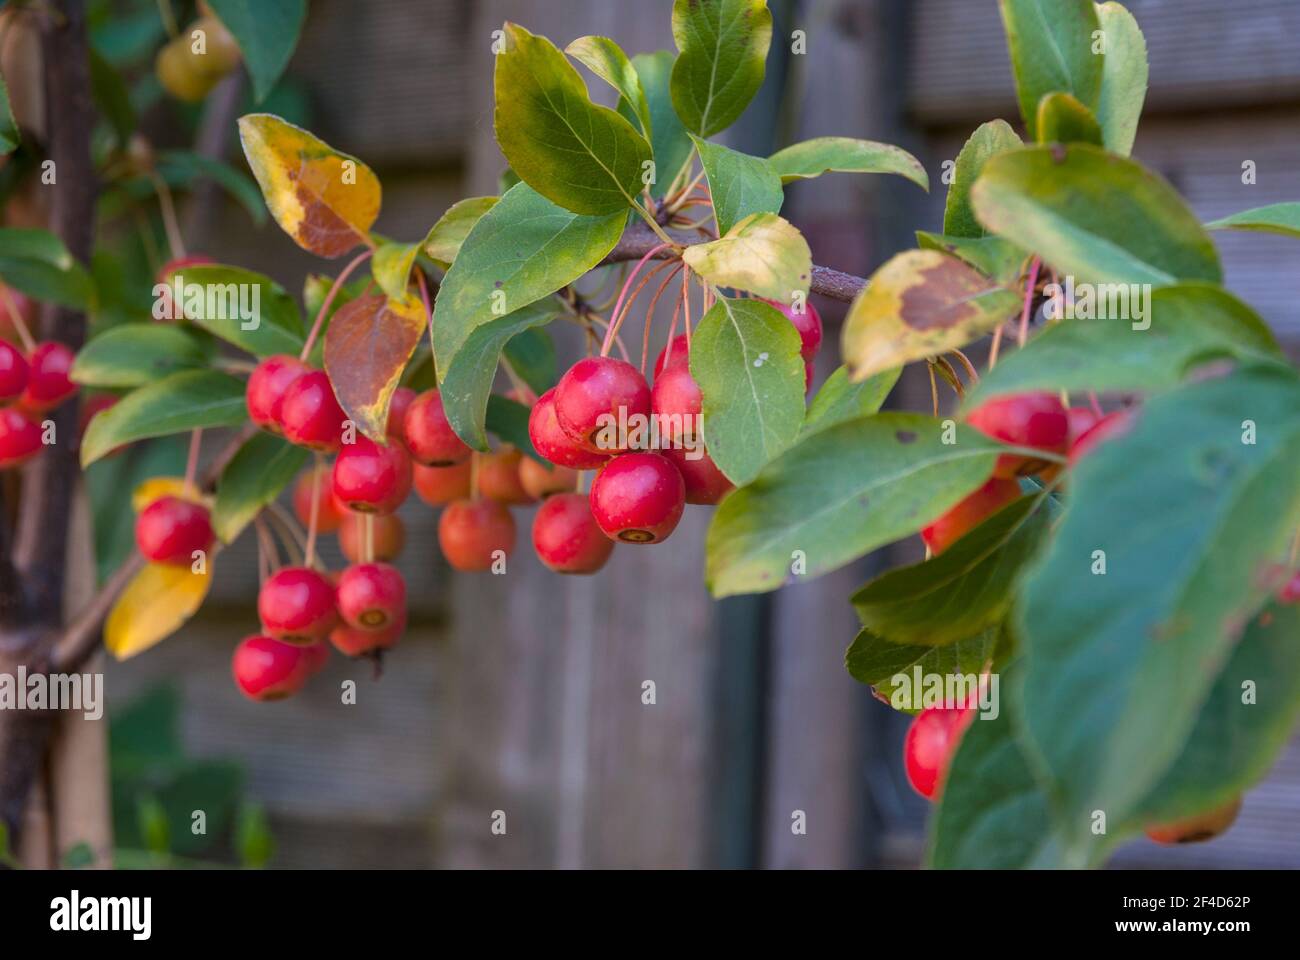 Bunch of little apples (Malus appletini) on a branch Stock Photo